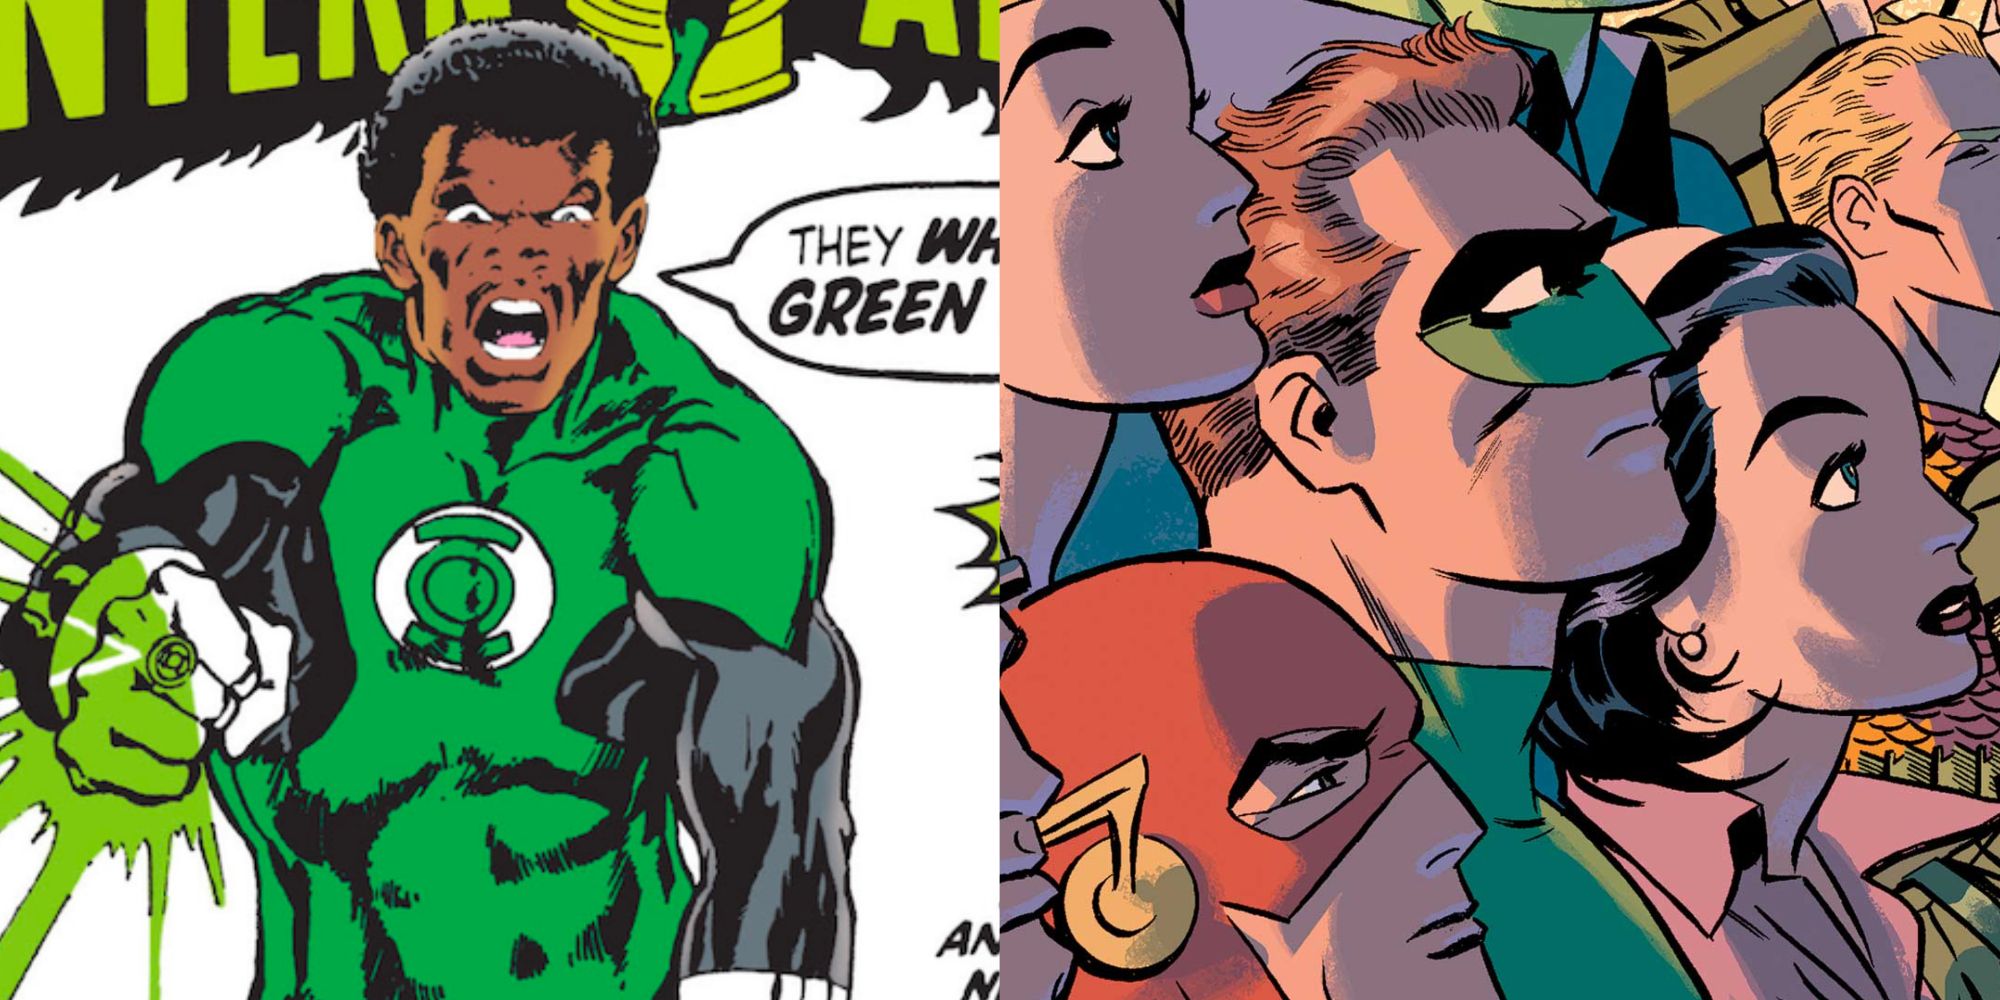 Split image of John Stewart as Green Lantern and Justice League from DC: The New Frontier comics.